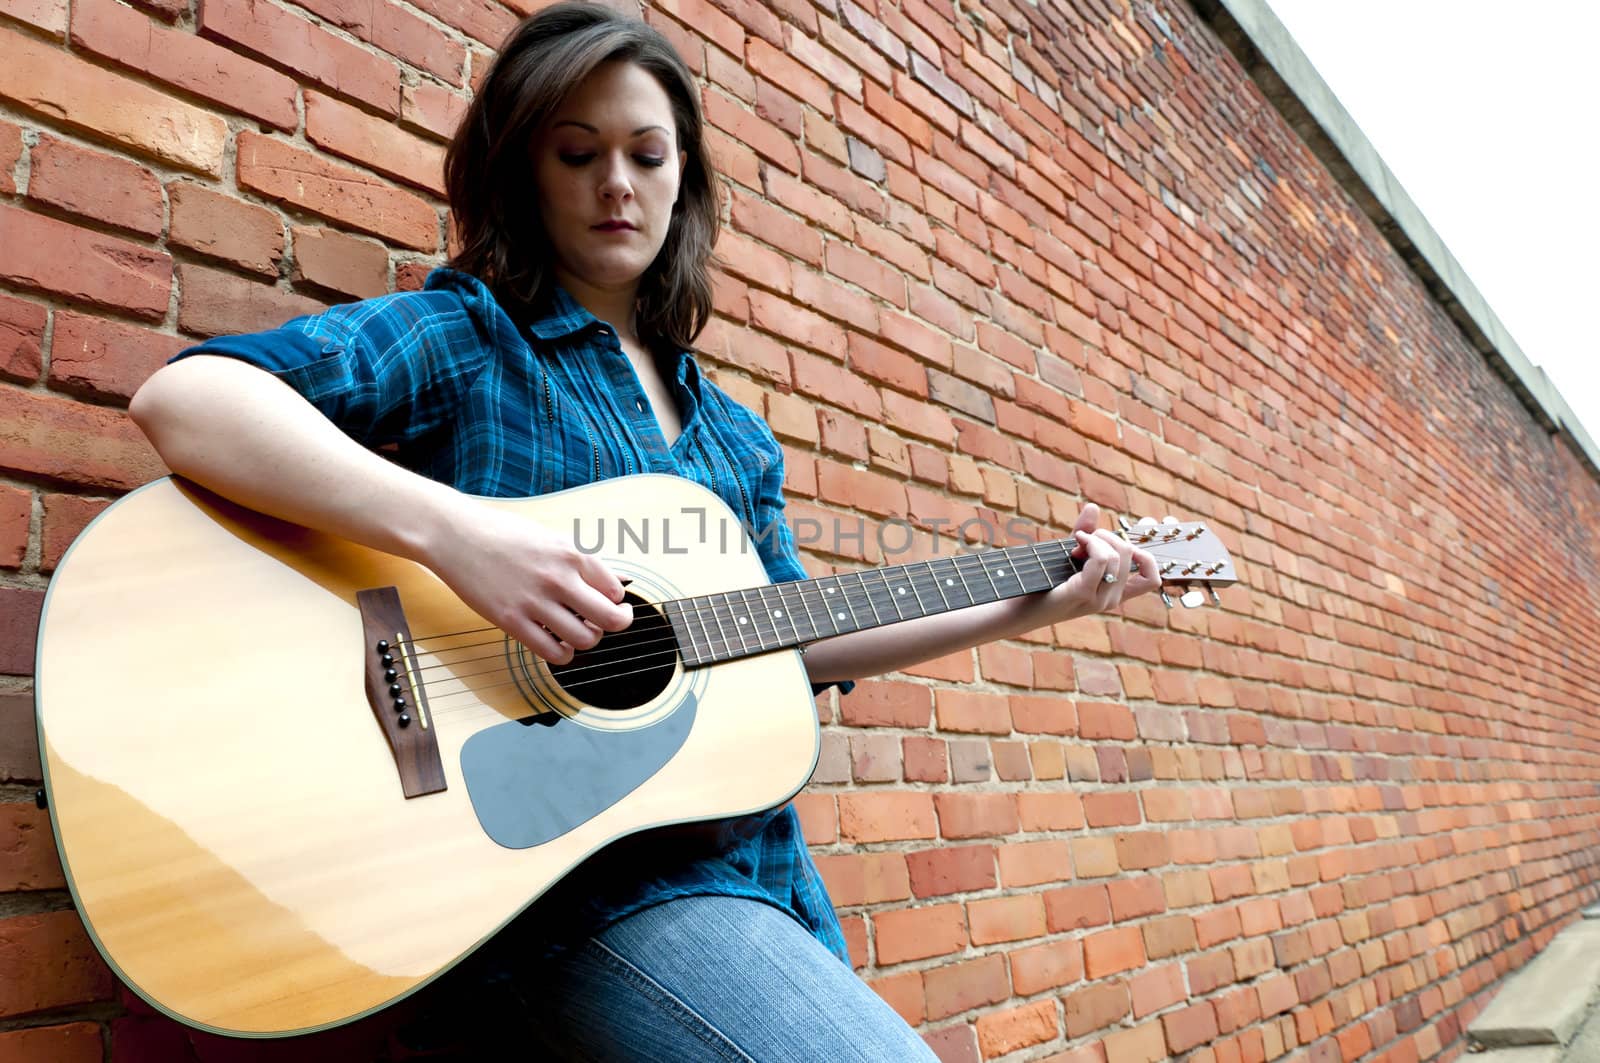 Young woman playing guitar outside while leaning against brick wall.